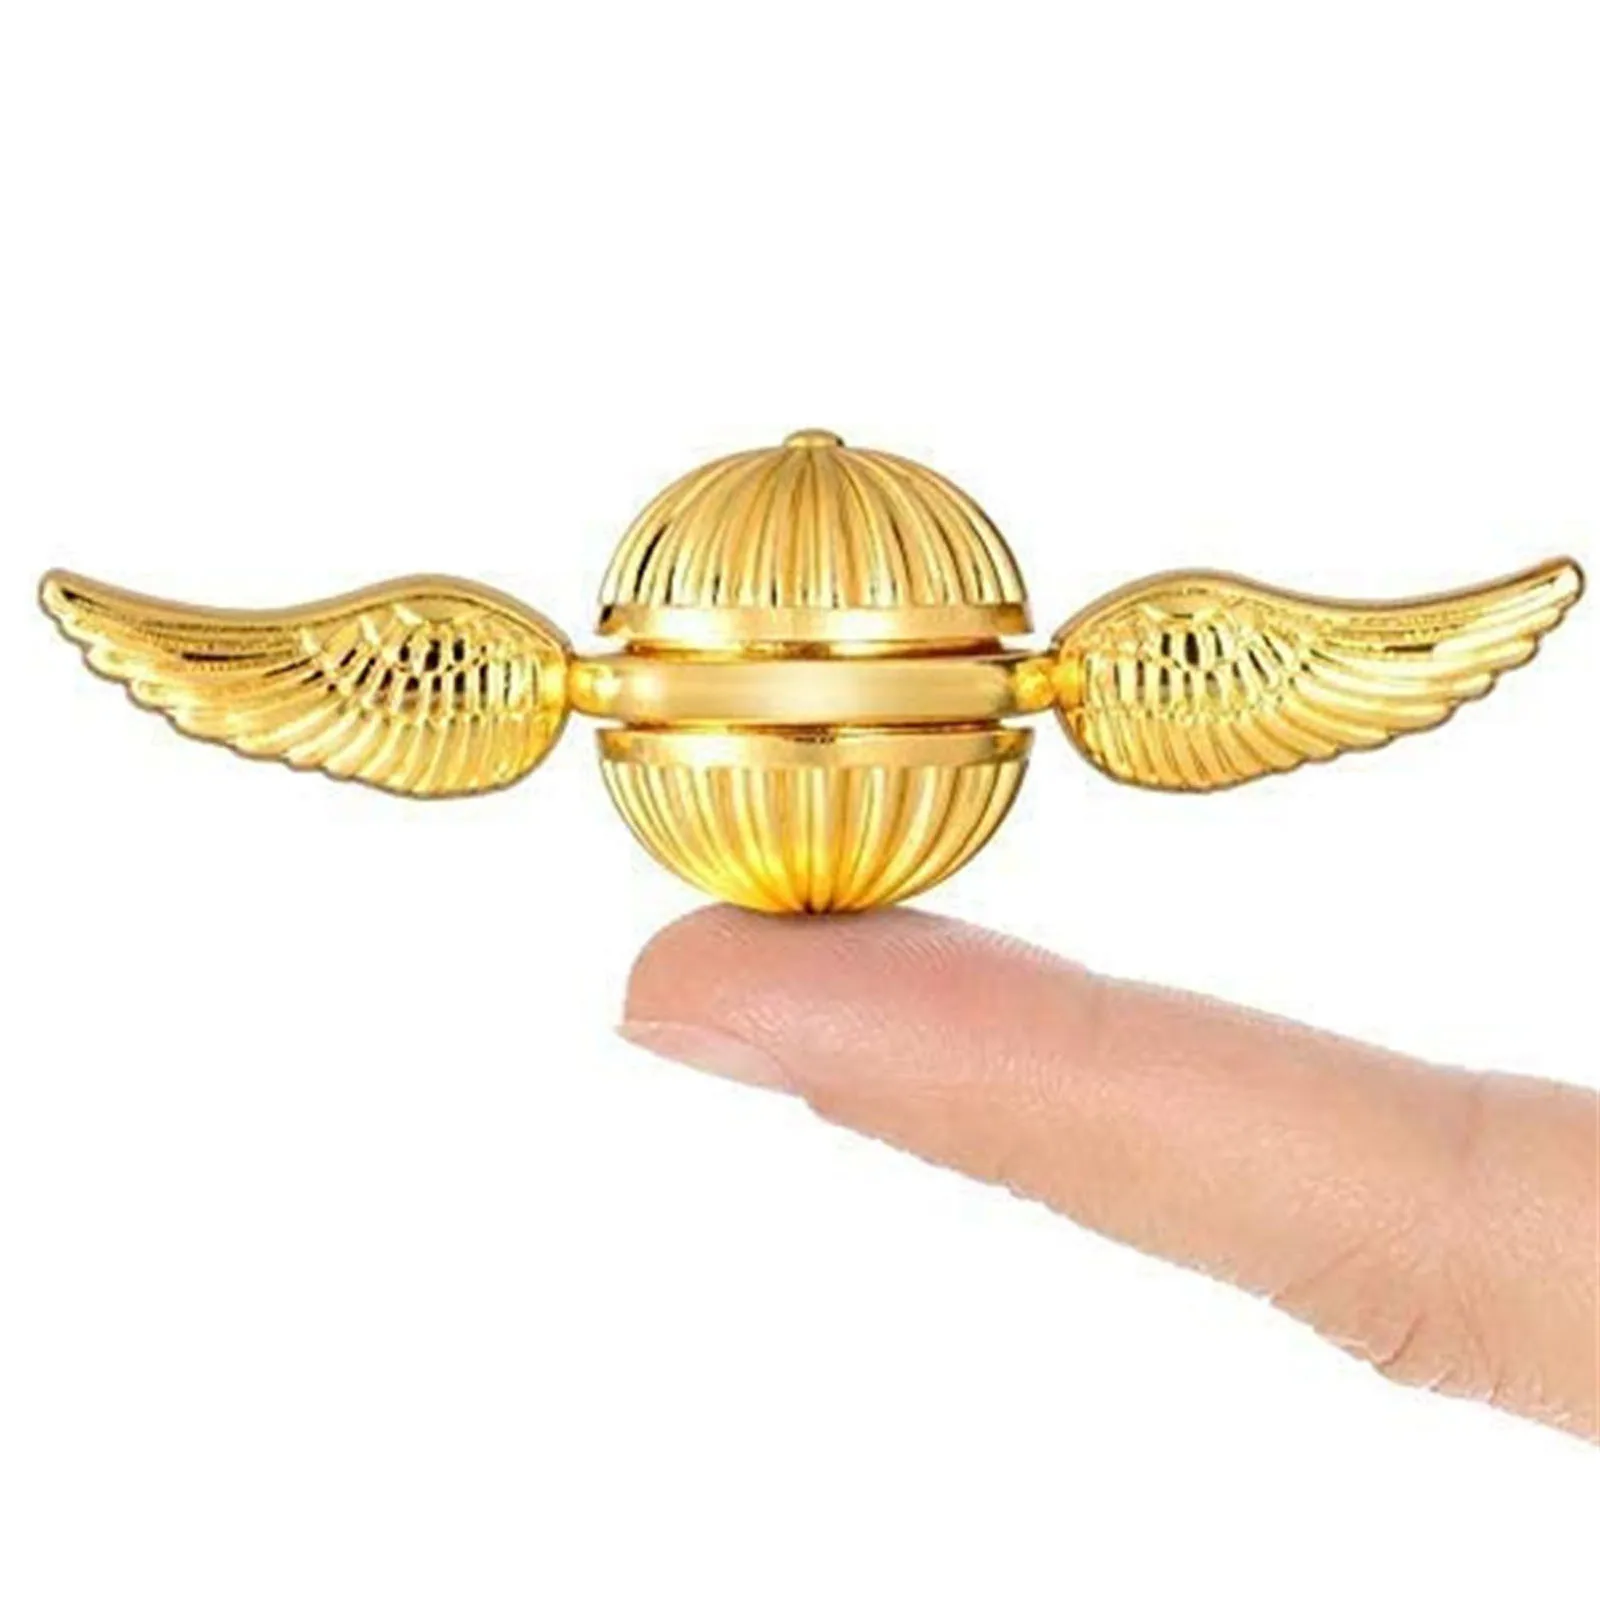 

New golden ball fingertip spinning top toy children's metal finger rotating compression adult toy anxiety and stress relief